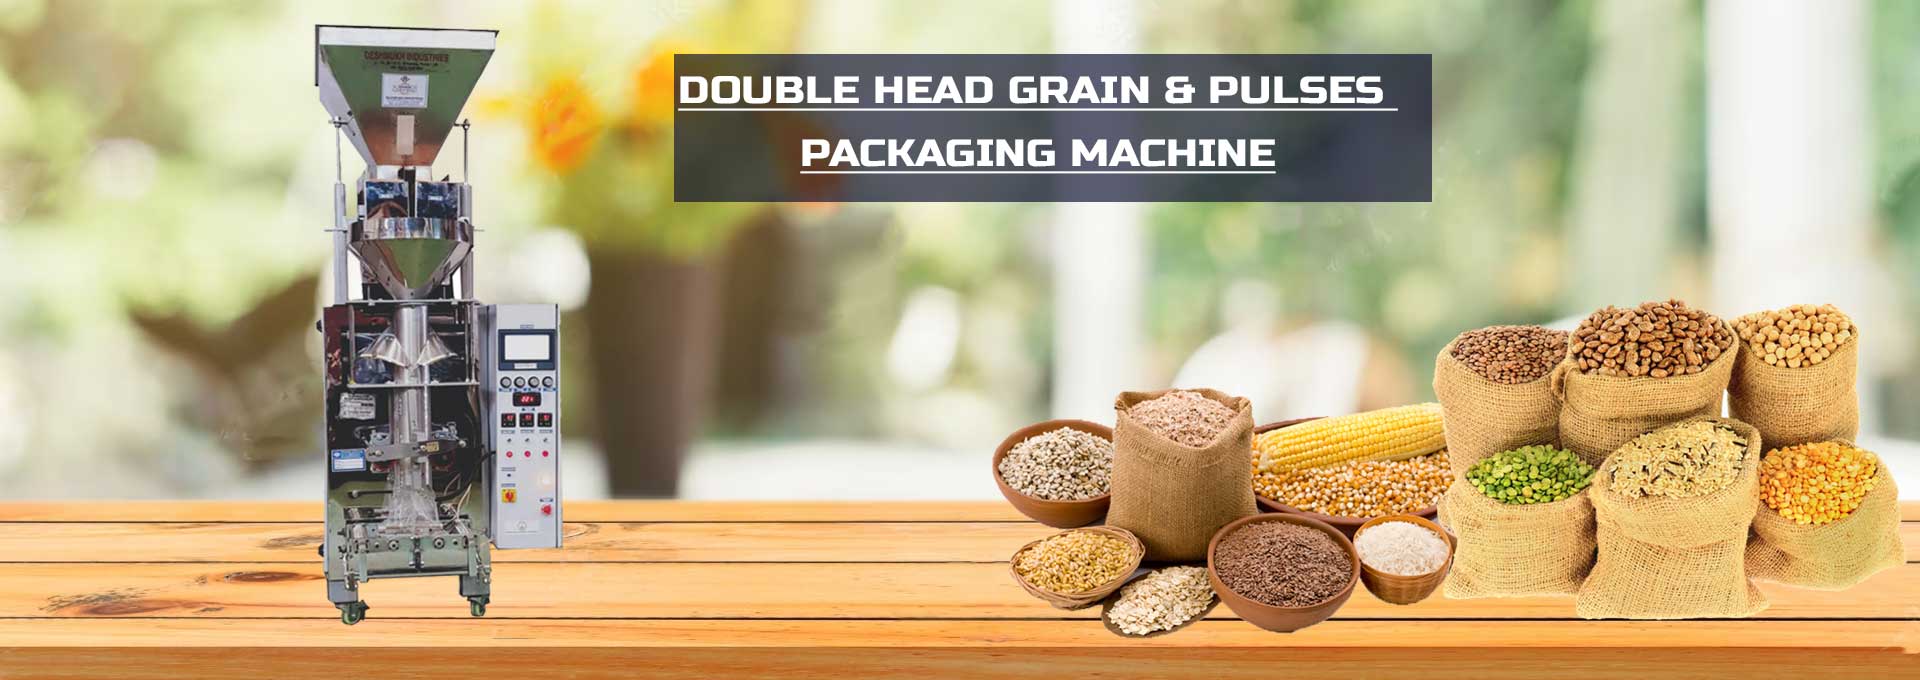 Double Head Grains & Pulses Packaging Machine Manufacturers